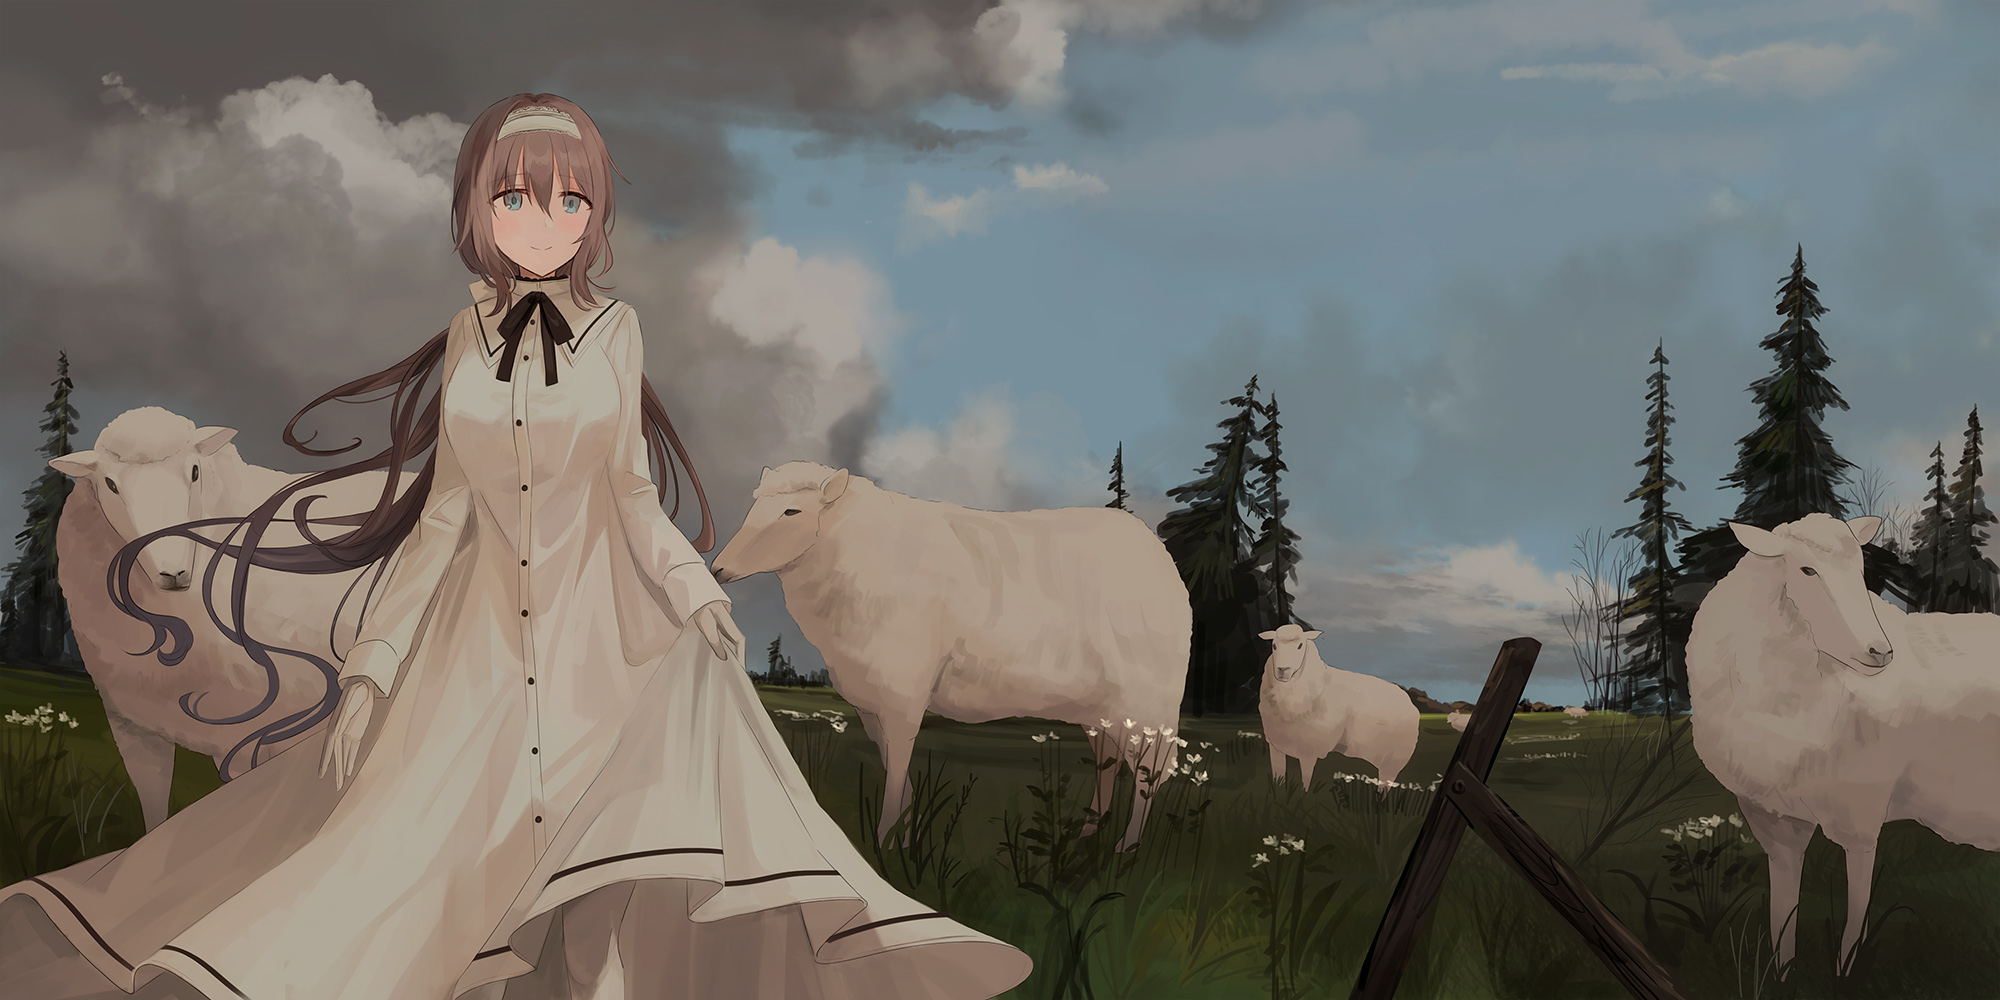 Anime Girls Original Characters Long Hair Headband Looking Into The Distance Smiling Dress White Dre 2000x1000